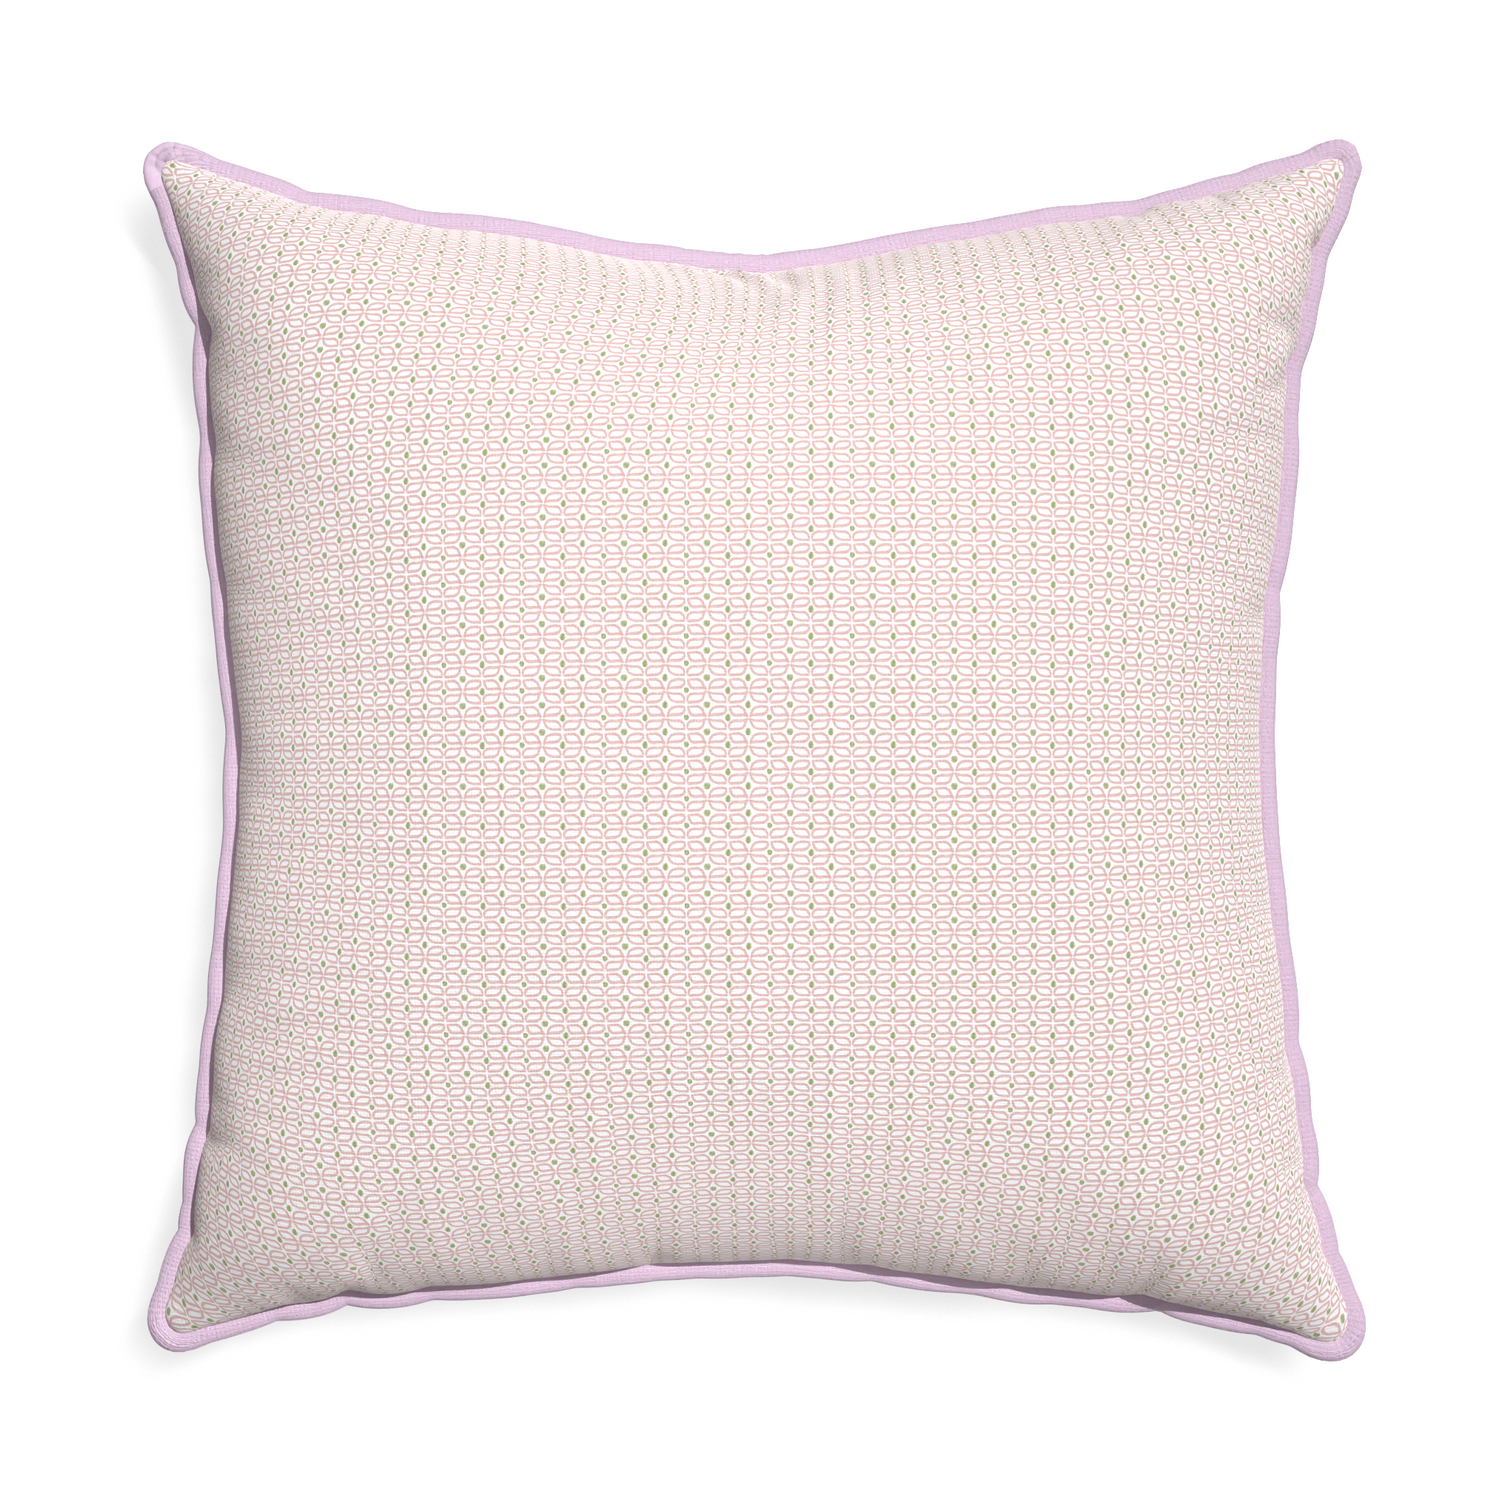 Euro-sham loomi pink custom pillow with l piping on white background